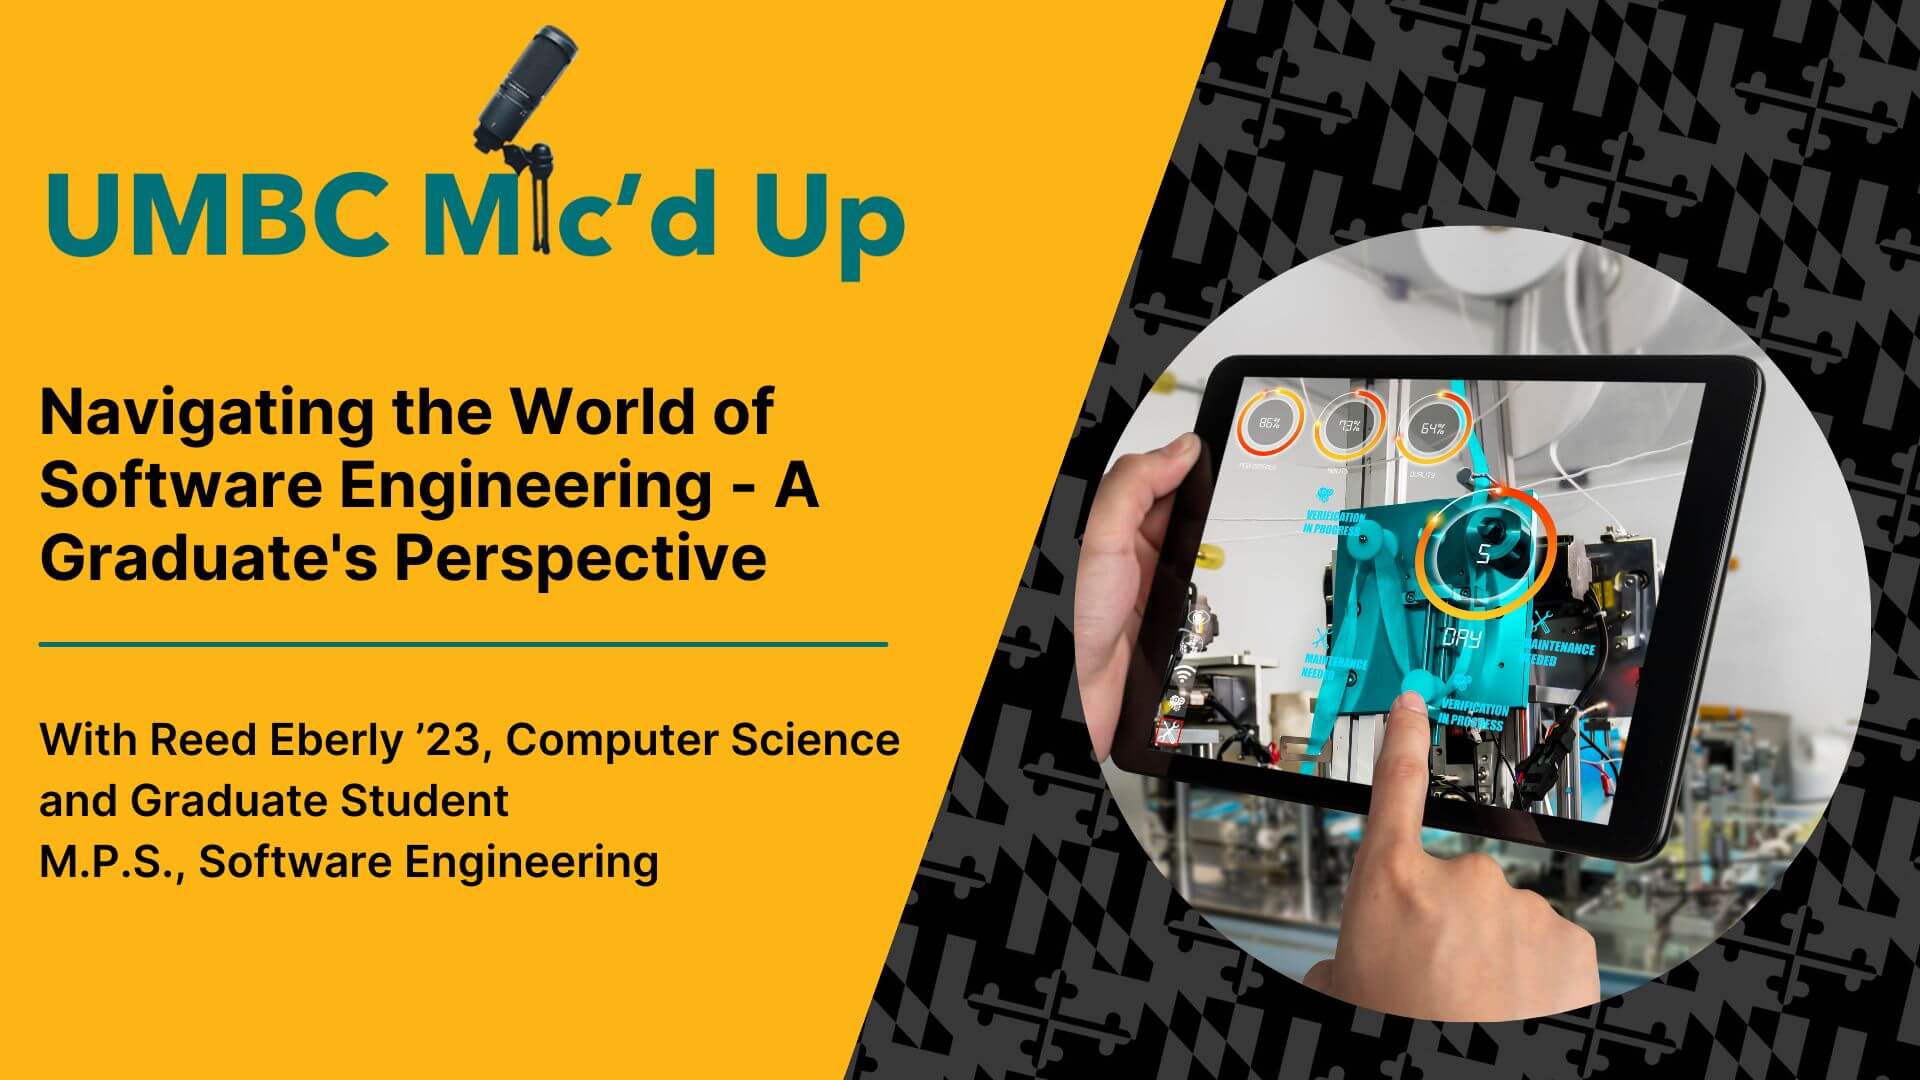 Reed Eberly shares his insights into software engineering in this UMBC Mic'd Up Podcast